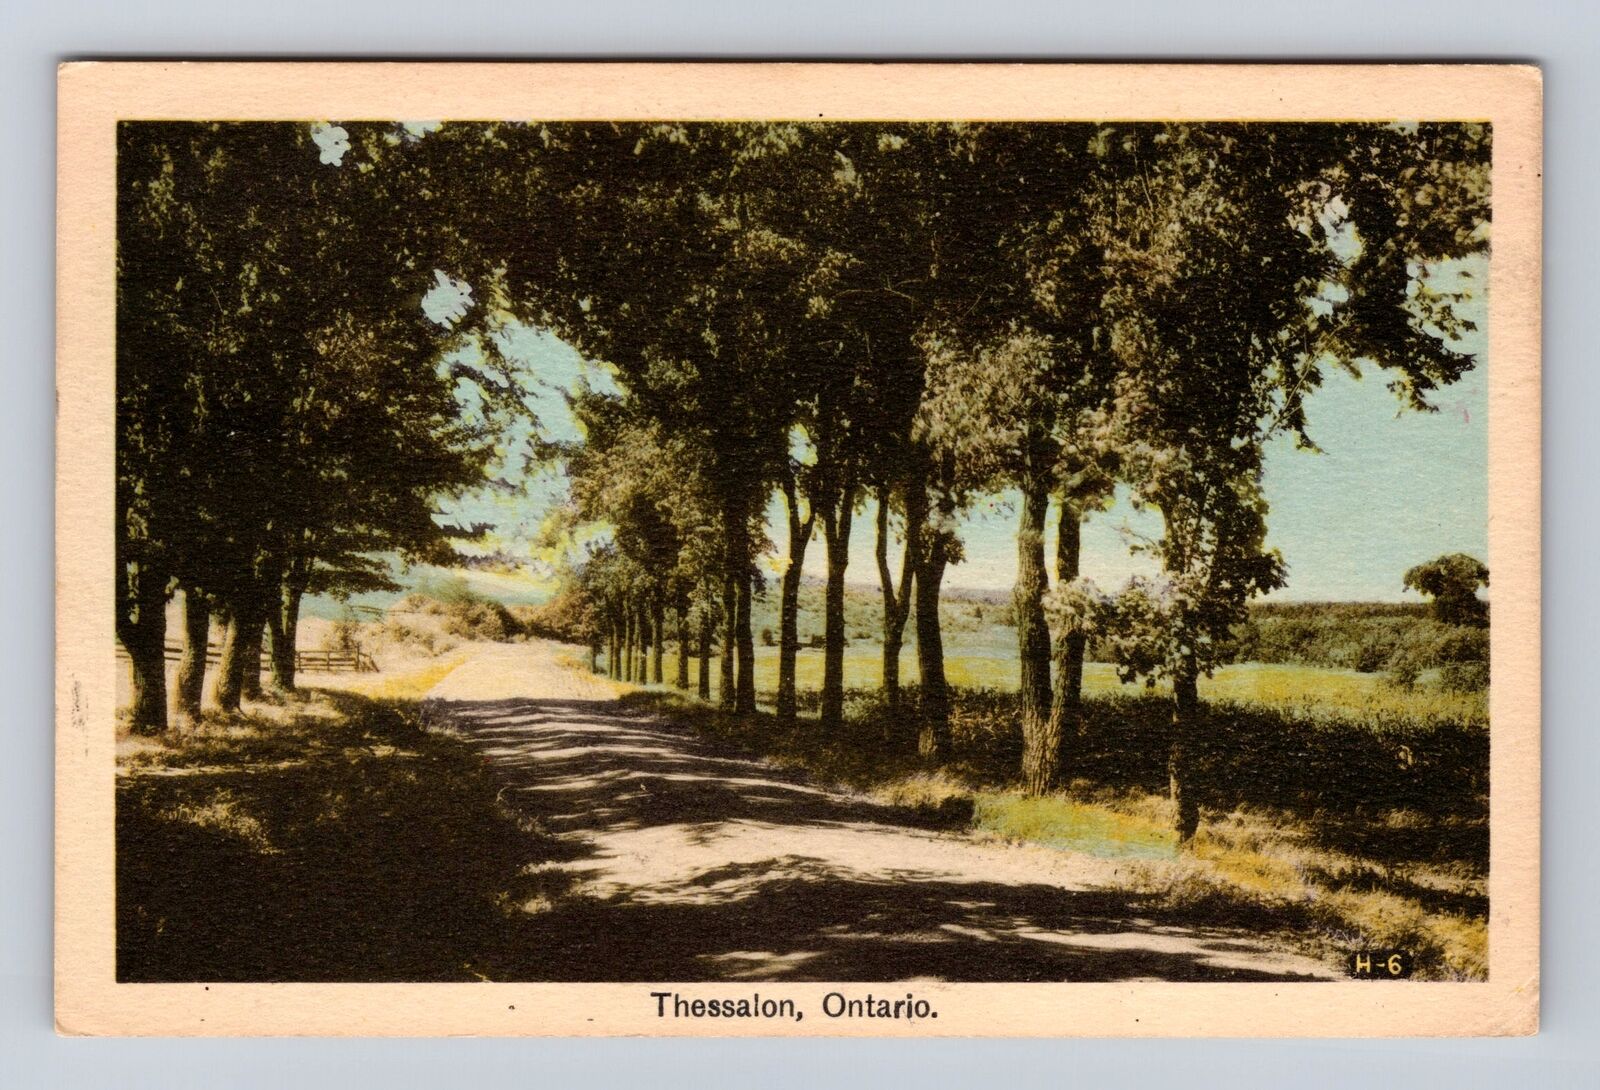 Thessalon Ontario- Canada, Scenic View Of Road, Antique, Vintage Postcard